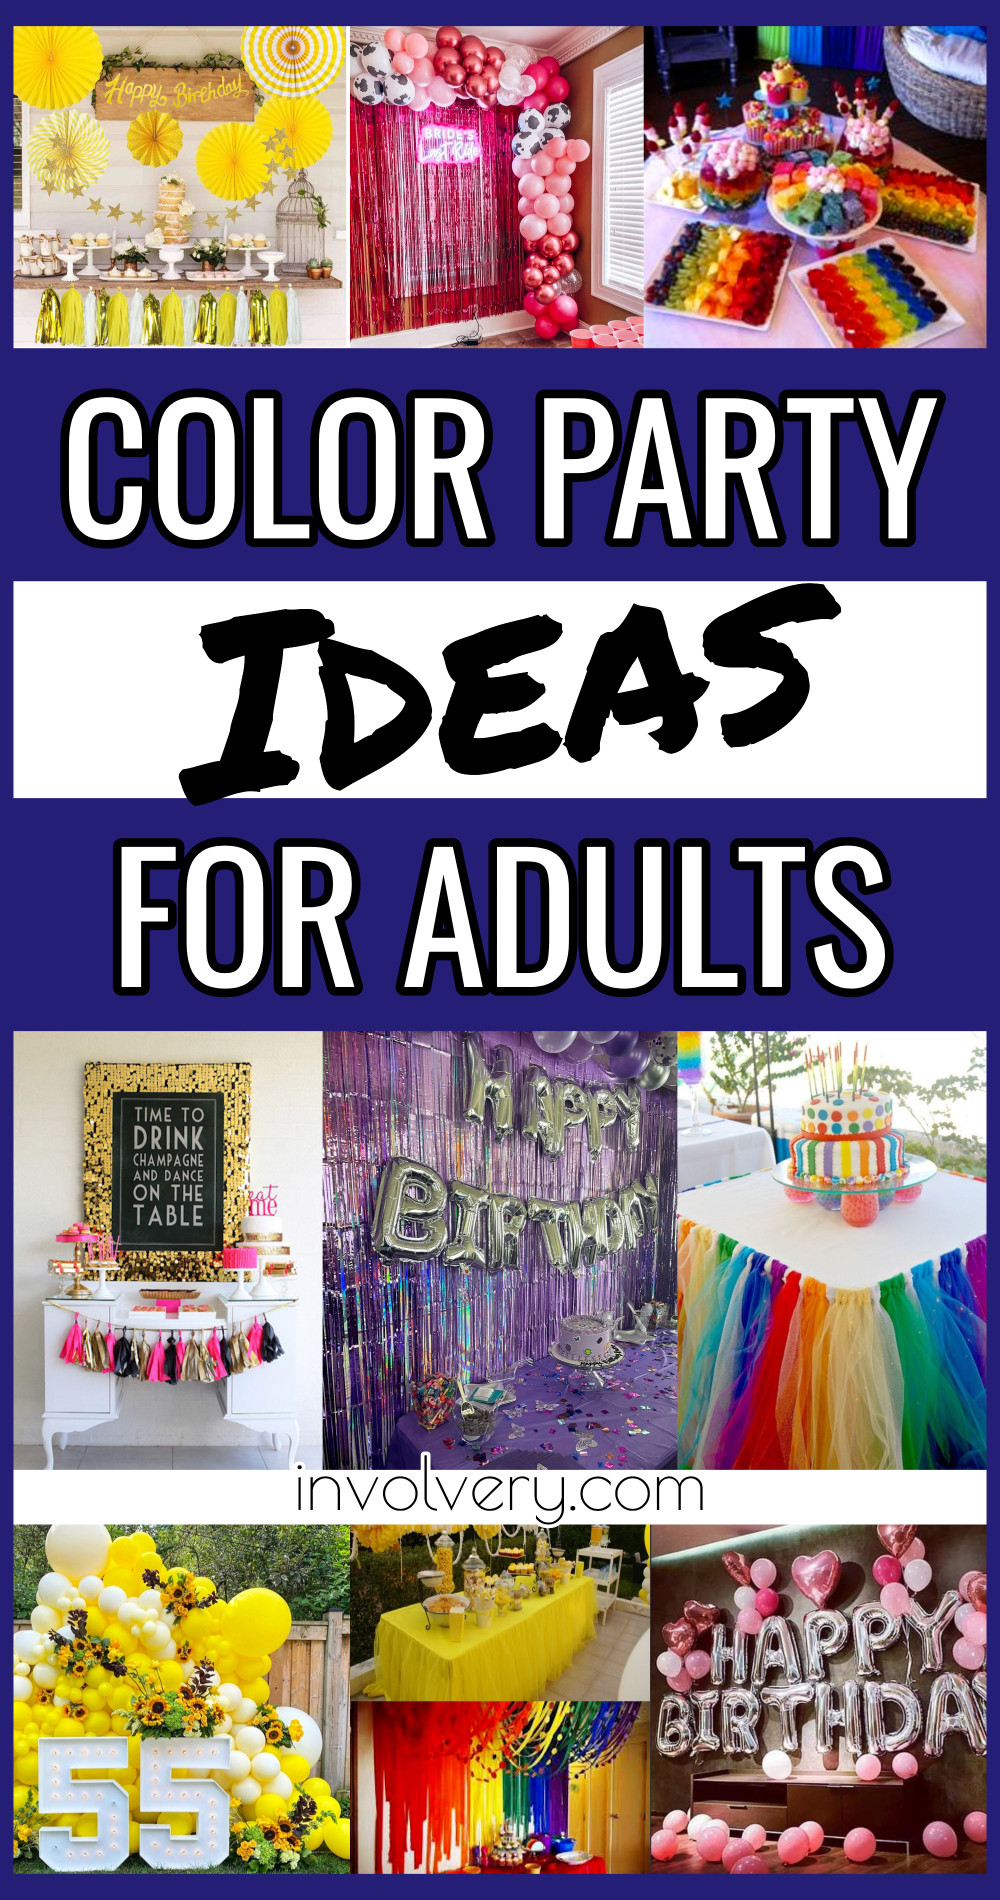 Color party ideas for adults - color schemes including yellow, blue, pink, purple and rainbow party ideas - perfect grown up party theme for 50th birthday, ladies night out, 40th birthday bachelorette party, divorce party, jack and jill shower - balloons, table decor, food snacks drinks, decorations, backgrounds, classy party colour themes for adults for a fun and unique TikTok worthy adult party - dress code tips too